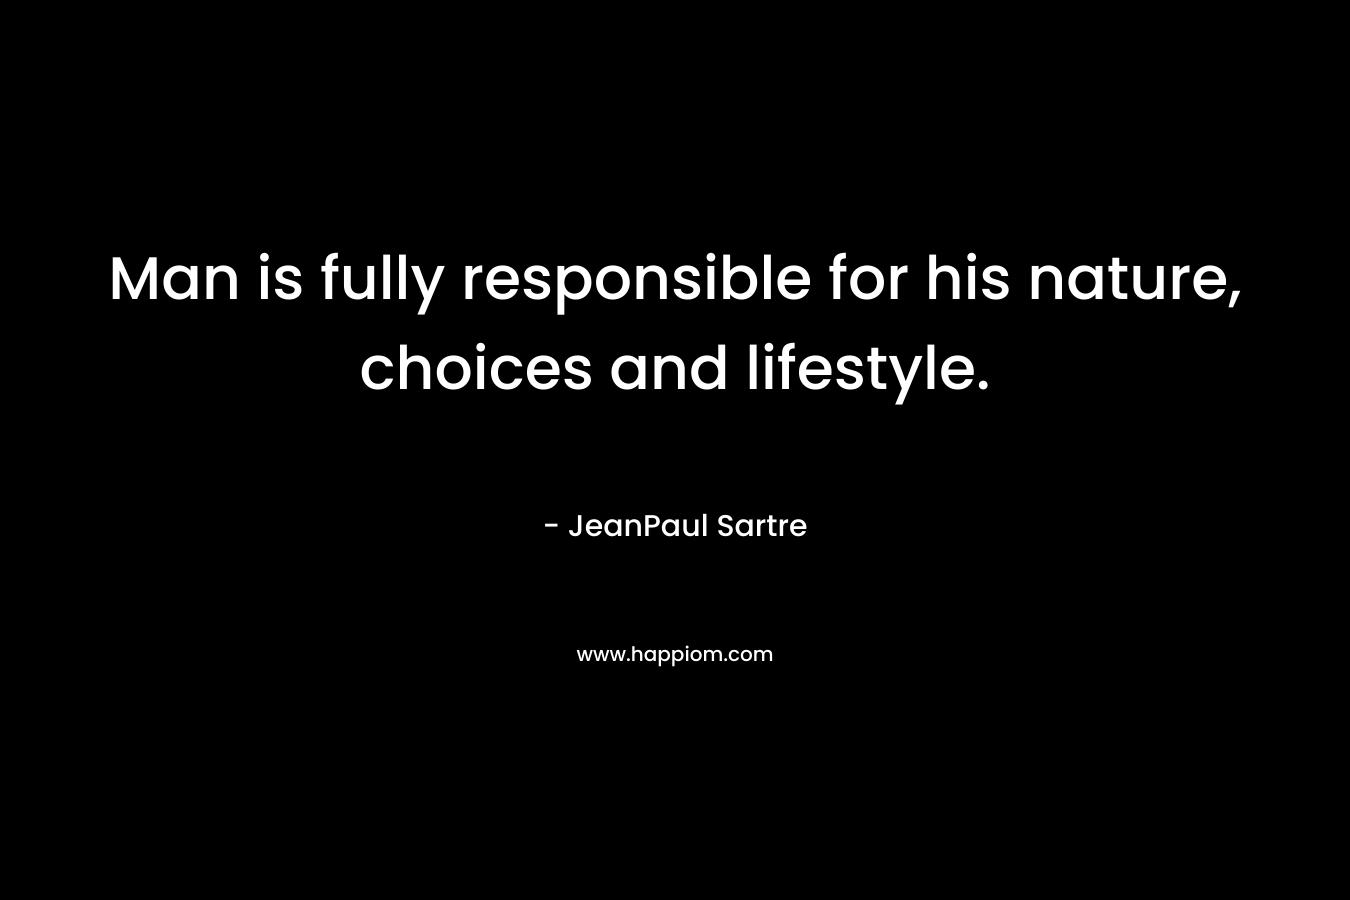 Man is fully responsible for his nature, choices and lifestyle.